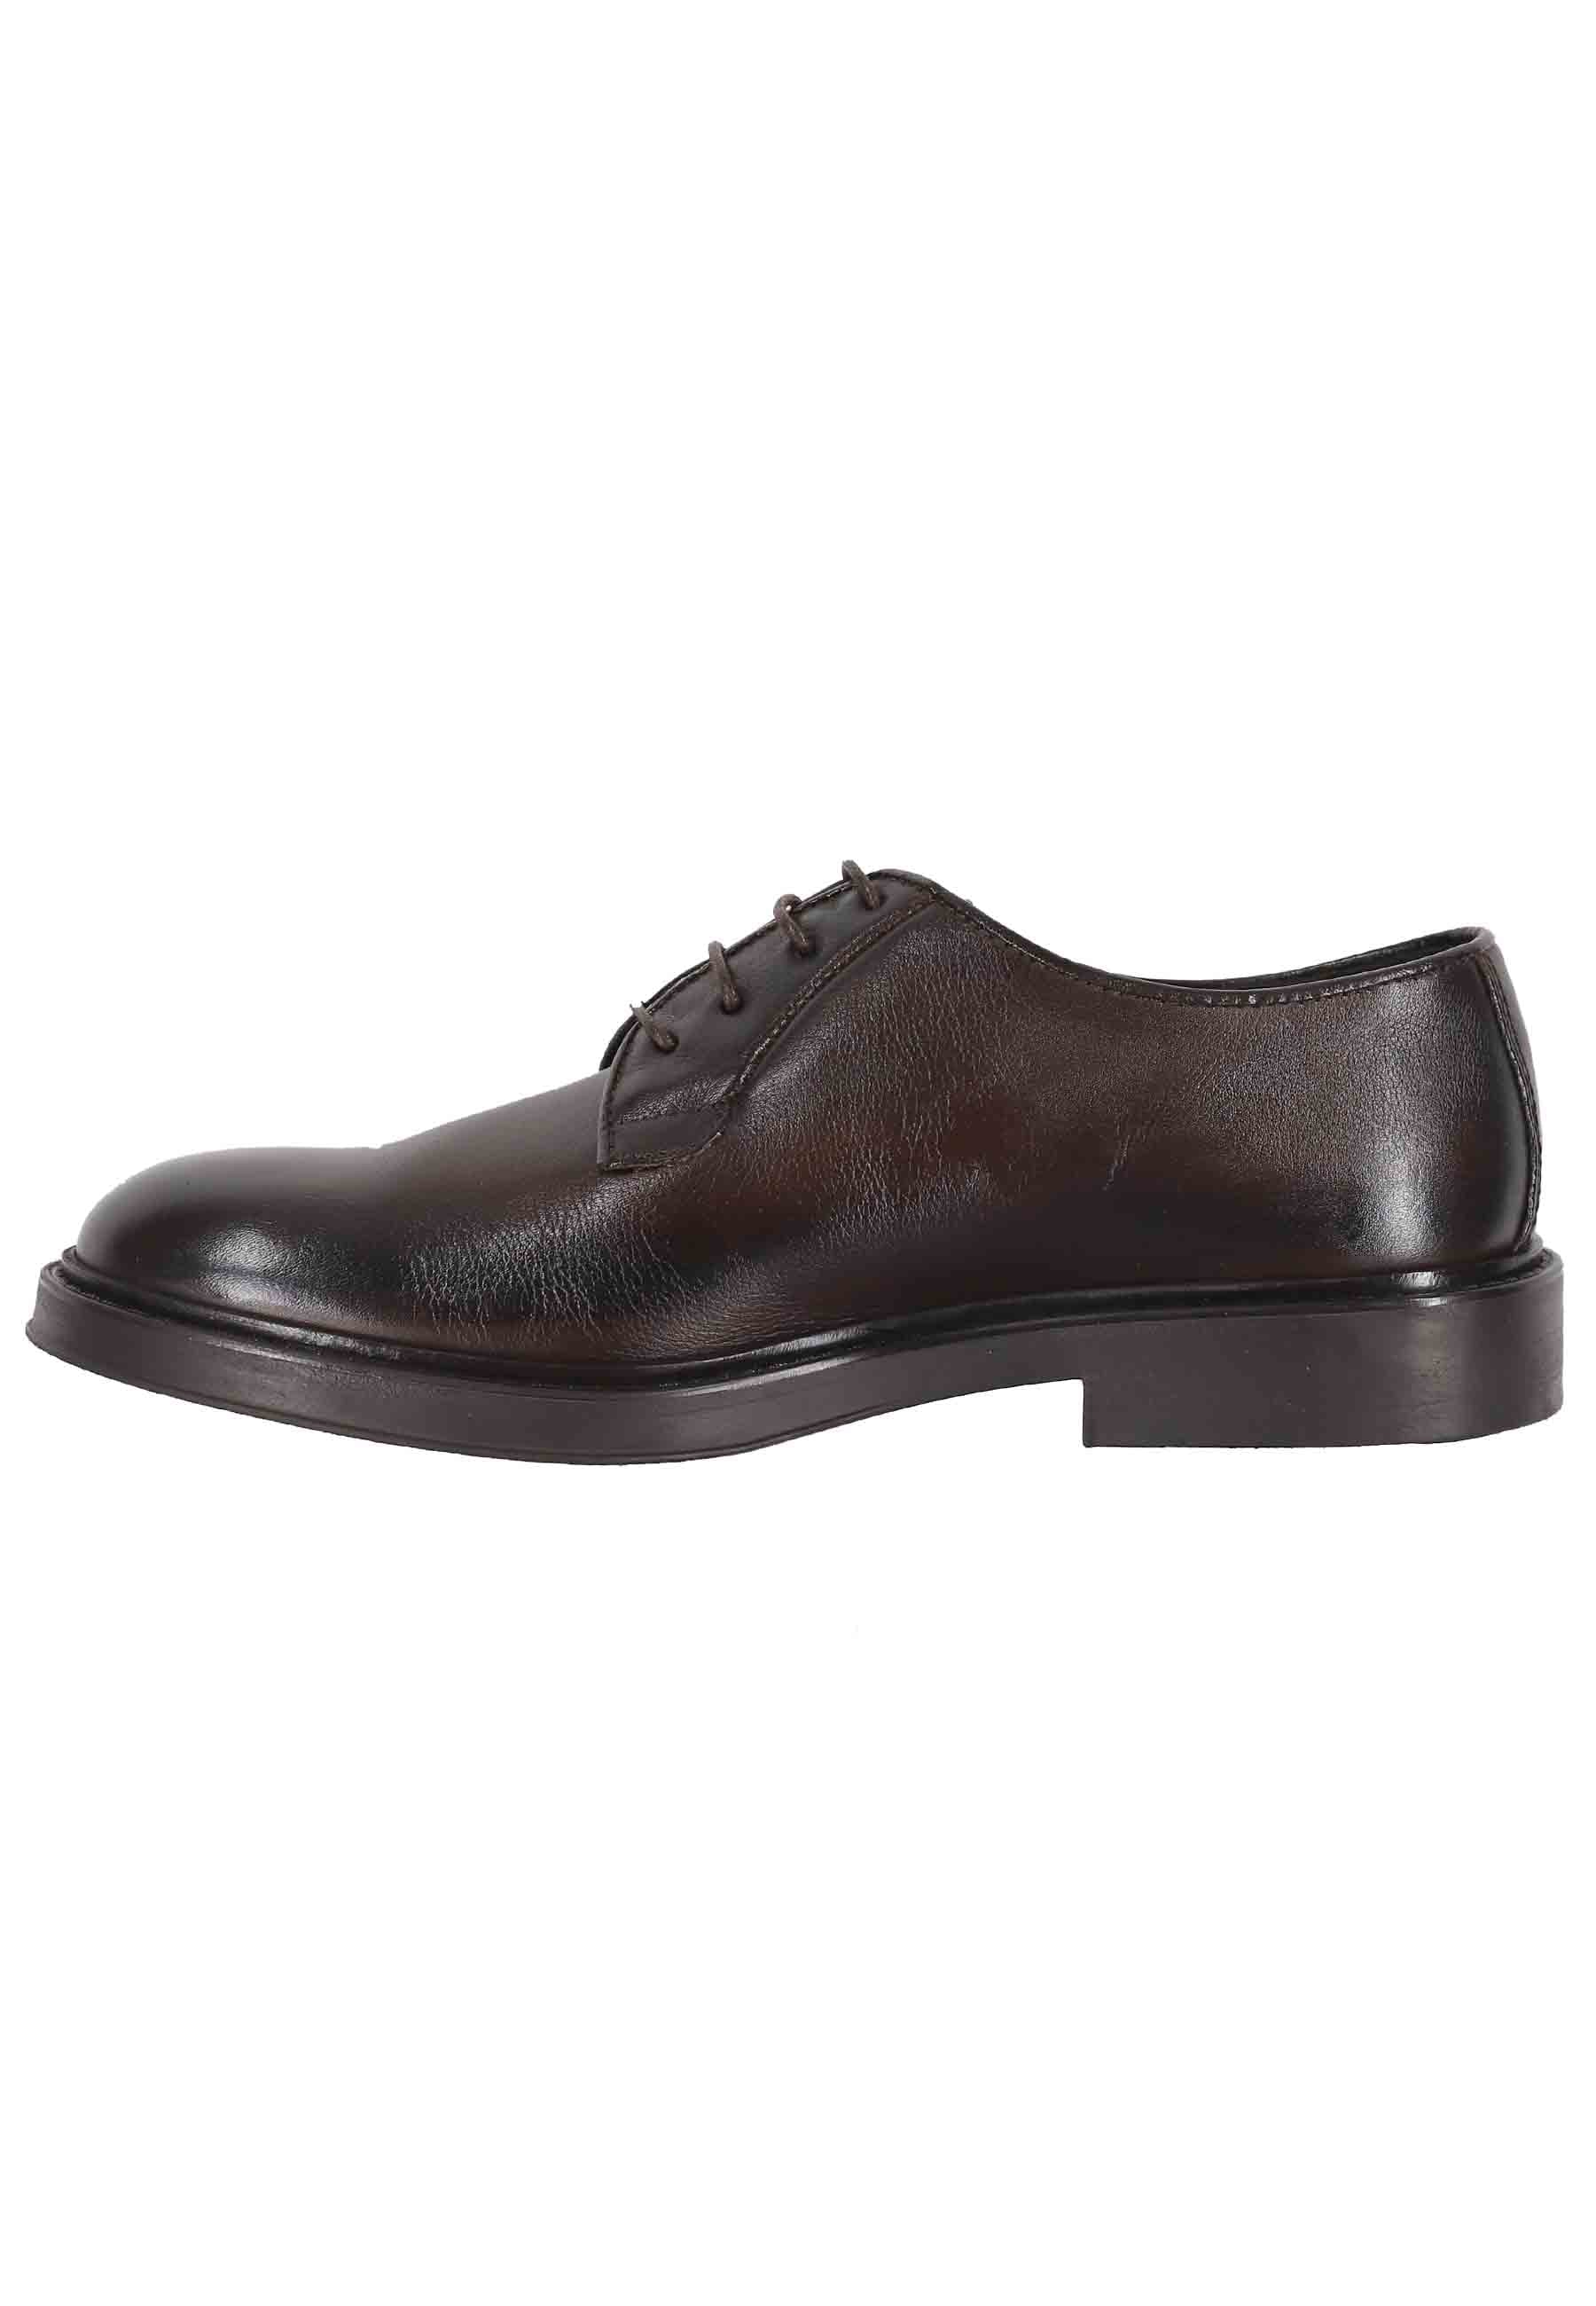 Men's lace-ups in dark brown leather with rubber sole